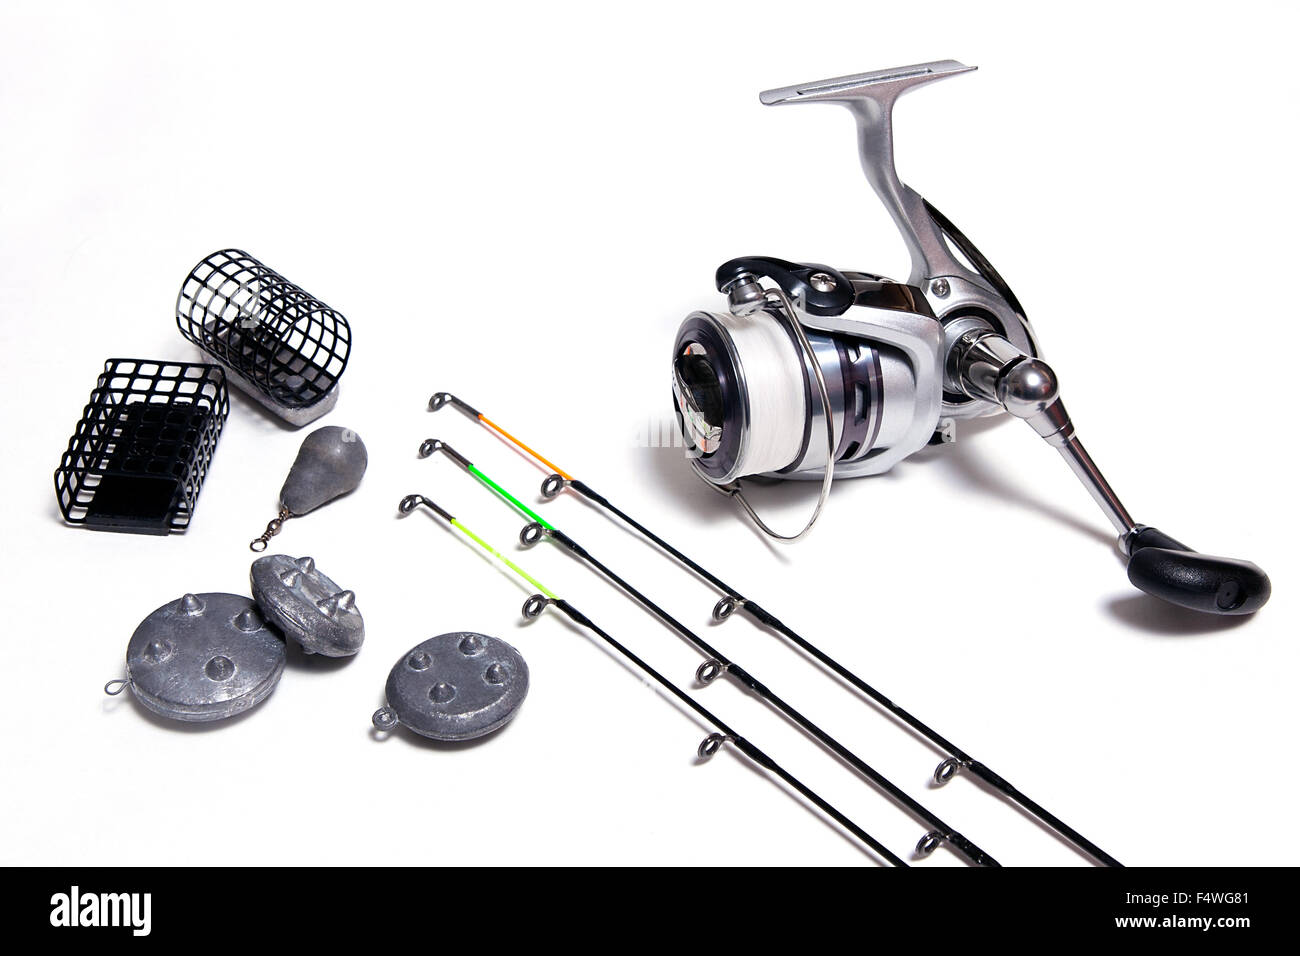 Fishing feeder and reel with accessories on white background. Fishing line,  feeder designed for bottom fishing and different tip Stock Photo - Alamy